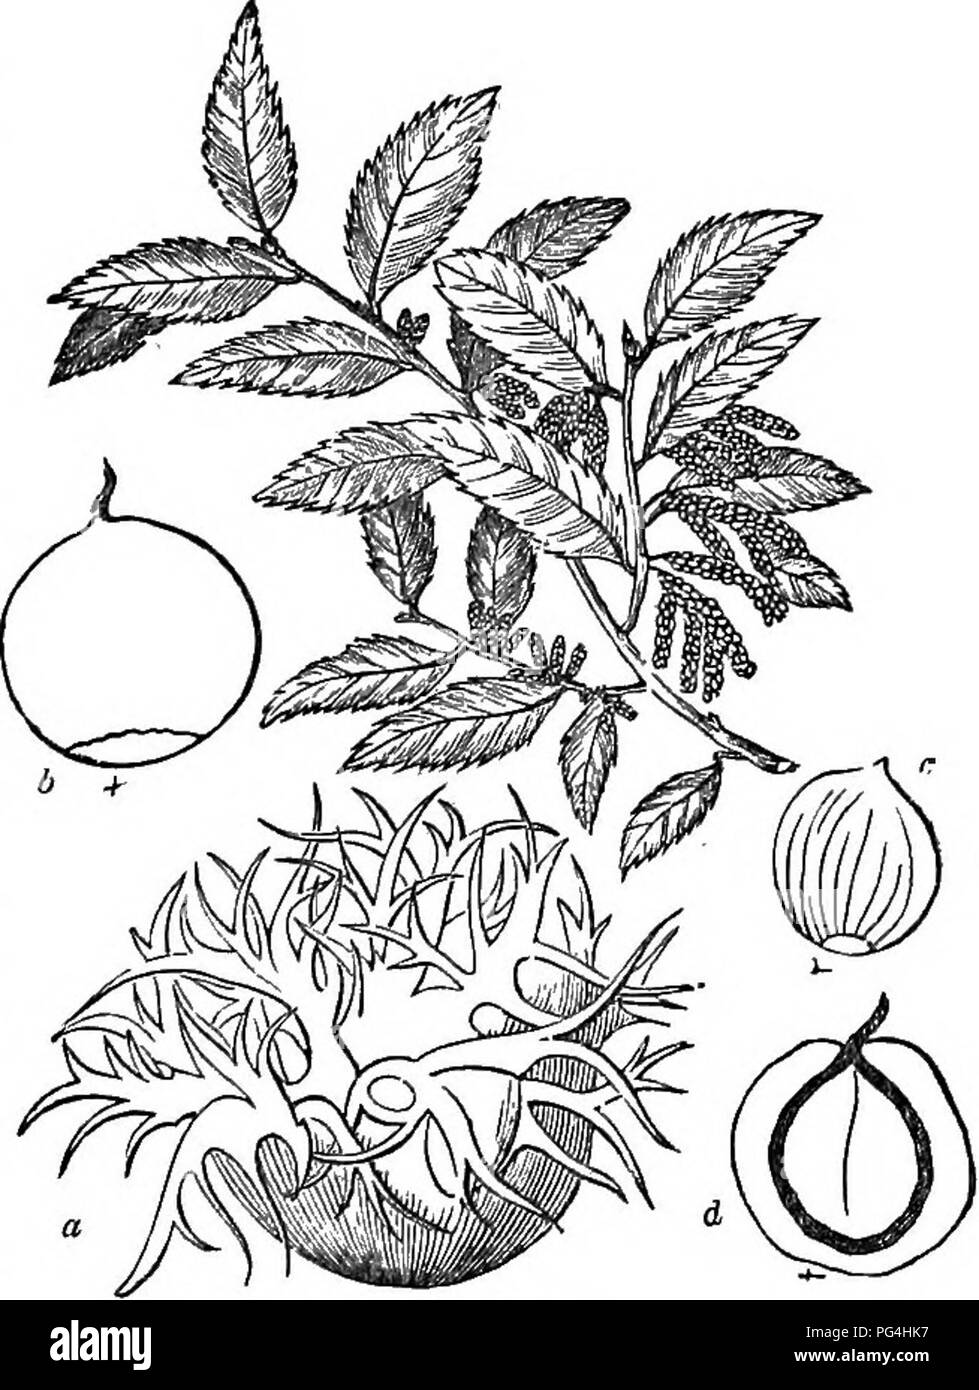 . Trees and shrubs : an abridgment of the Arboretum et fruticetum britannicum : containing the hardy trees and schrubs of Britain, native and foreign, scientifically and popularly described : with their propagation, culture and uses and engravings of nearly all the species. Trees; Shrubs; Forests and forestry. 1727. C rostrkta. Identification. 1836. Sffnont/mes, C. americSna hilmilis WoTig. Amer. 1 wild Filbert, Amer. Engravings. Wang. Amer., 88. t. 29. f. 63.; and out Jig. 1728. Spec. Char., S^c. Leaves roundish, cordate, acuminate. Invo- lucre of the fruit roundish, campanulate, longer than  Stock Photo